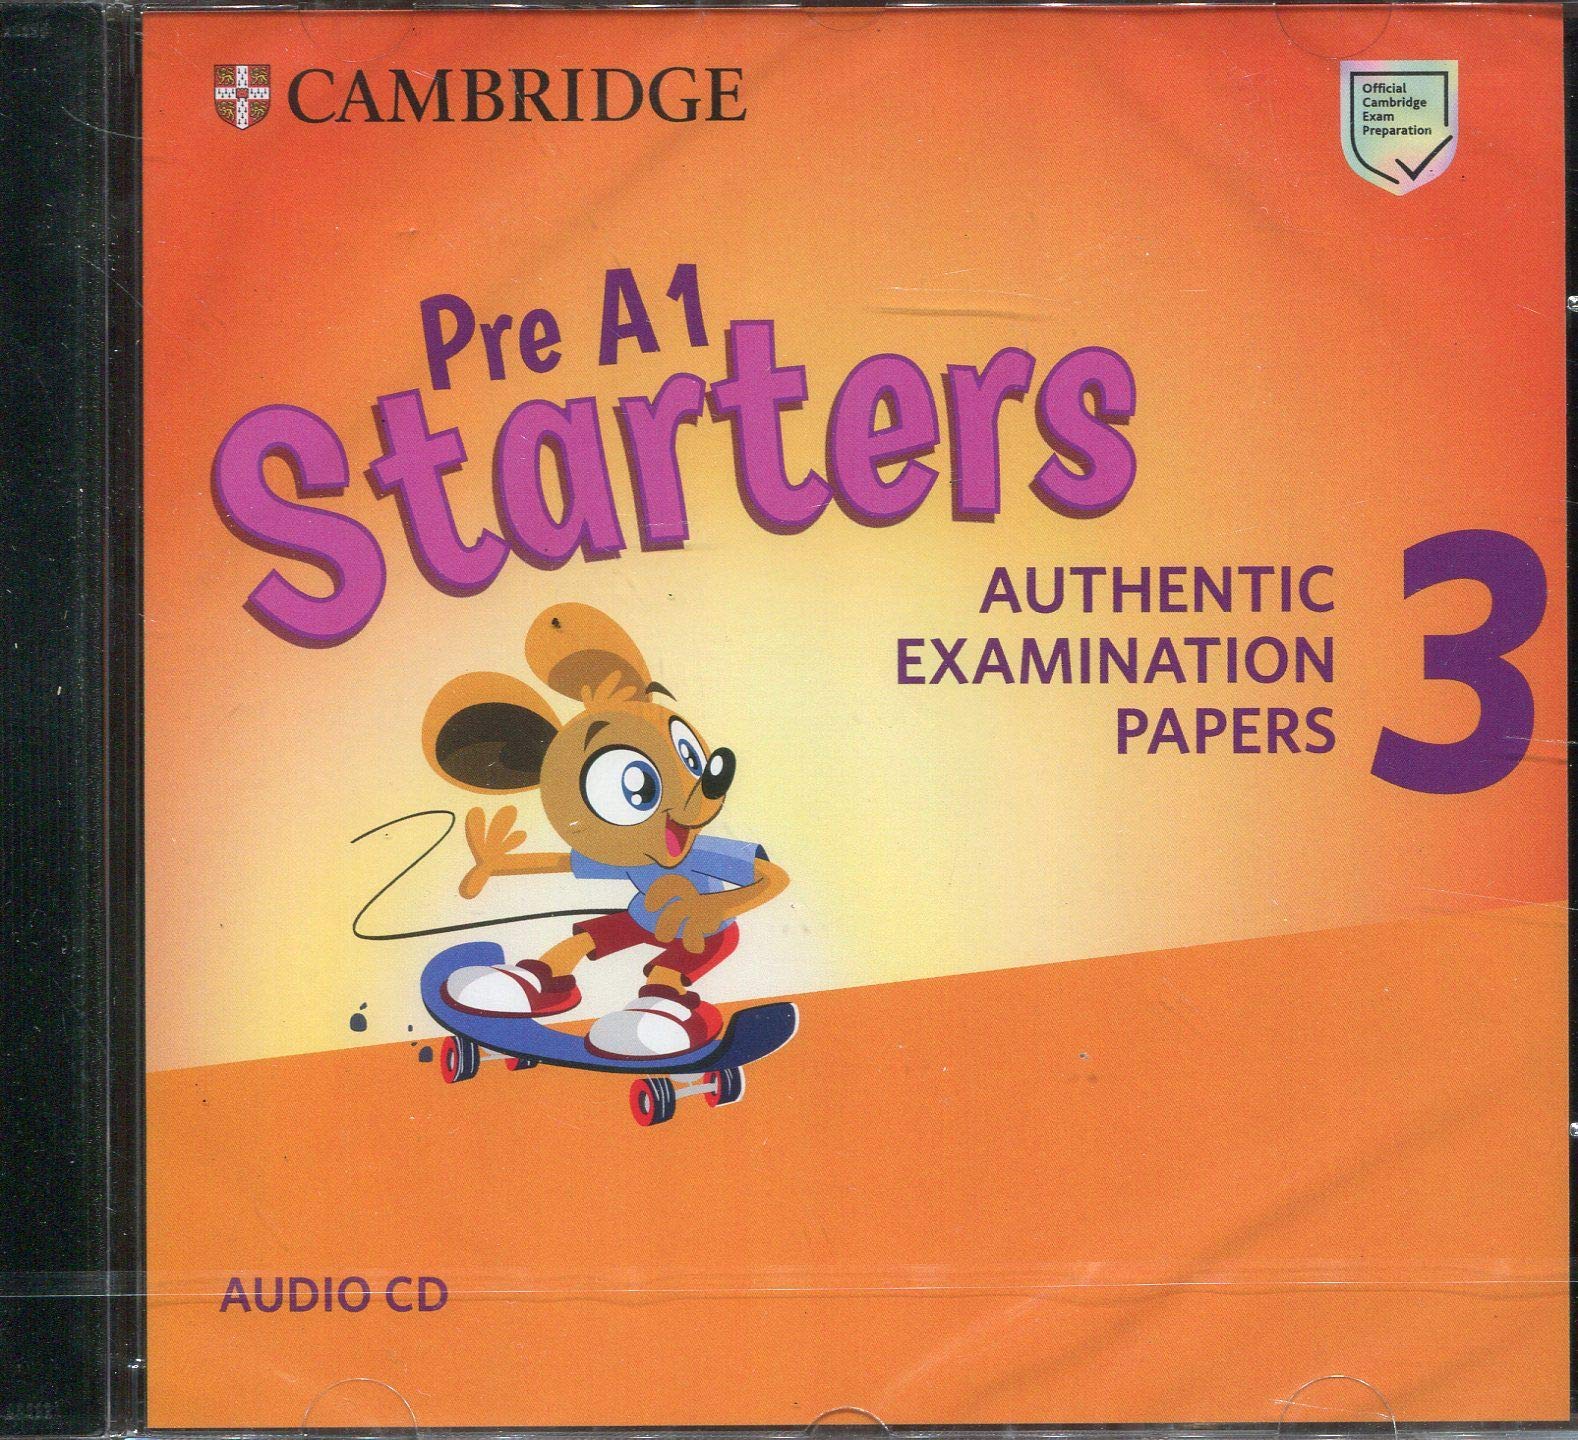 Pre a1 starters. Starters 3 authentic examination papers. Pre a1 Starters a1 Movers a2 Flyers. Starters authentic examination papers 1 Audio.